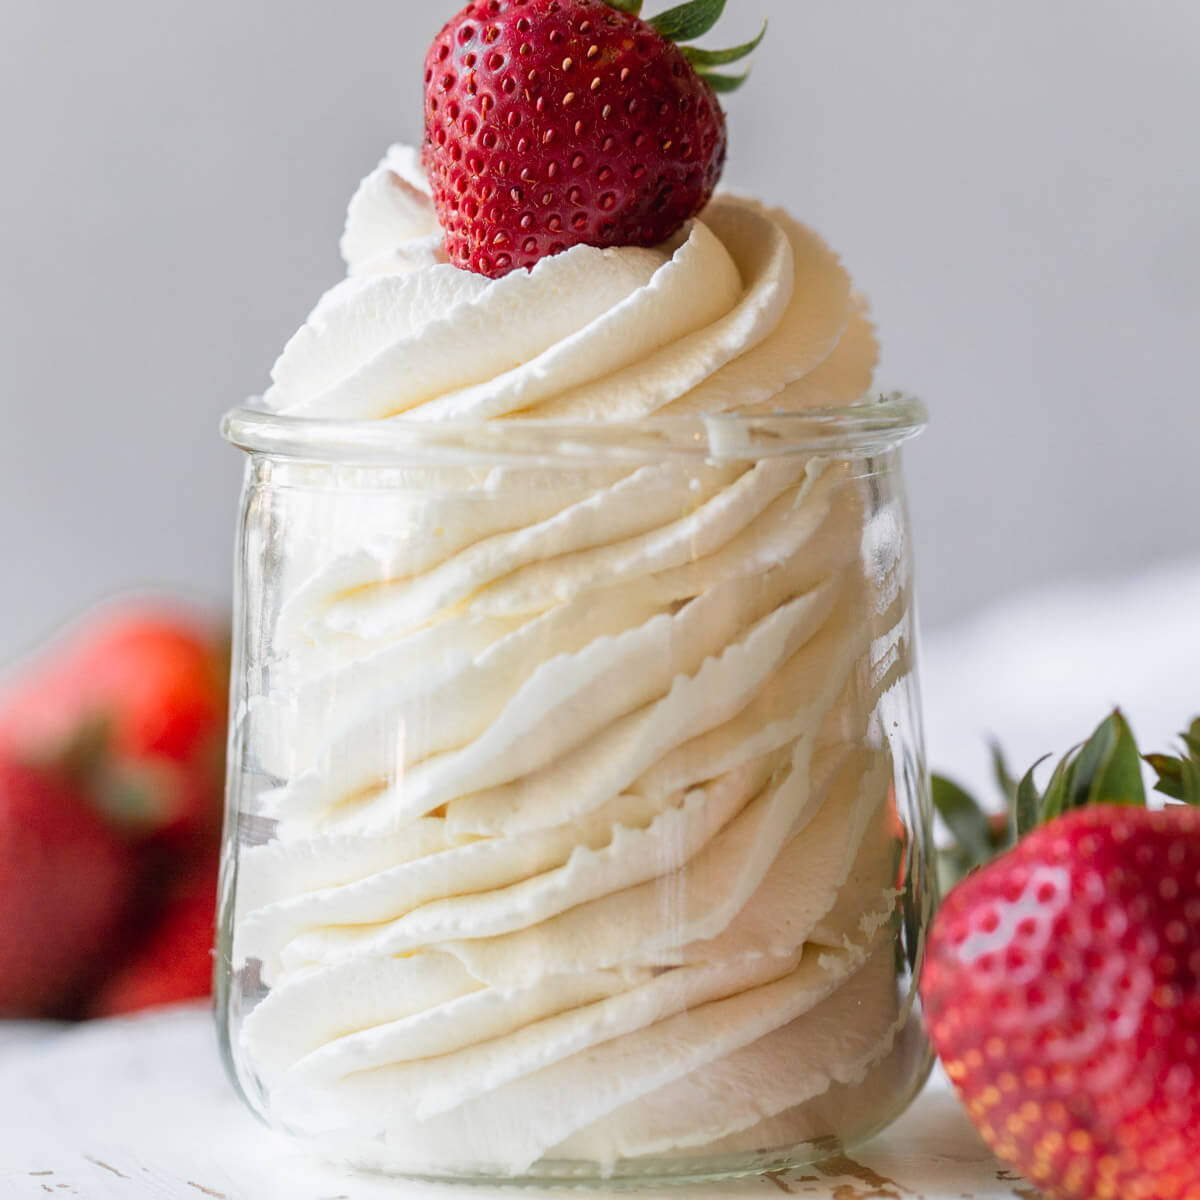 How to Make Whipped Cream at Home